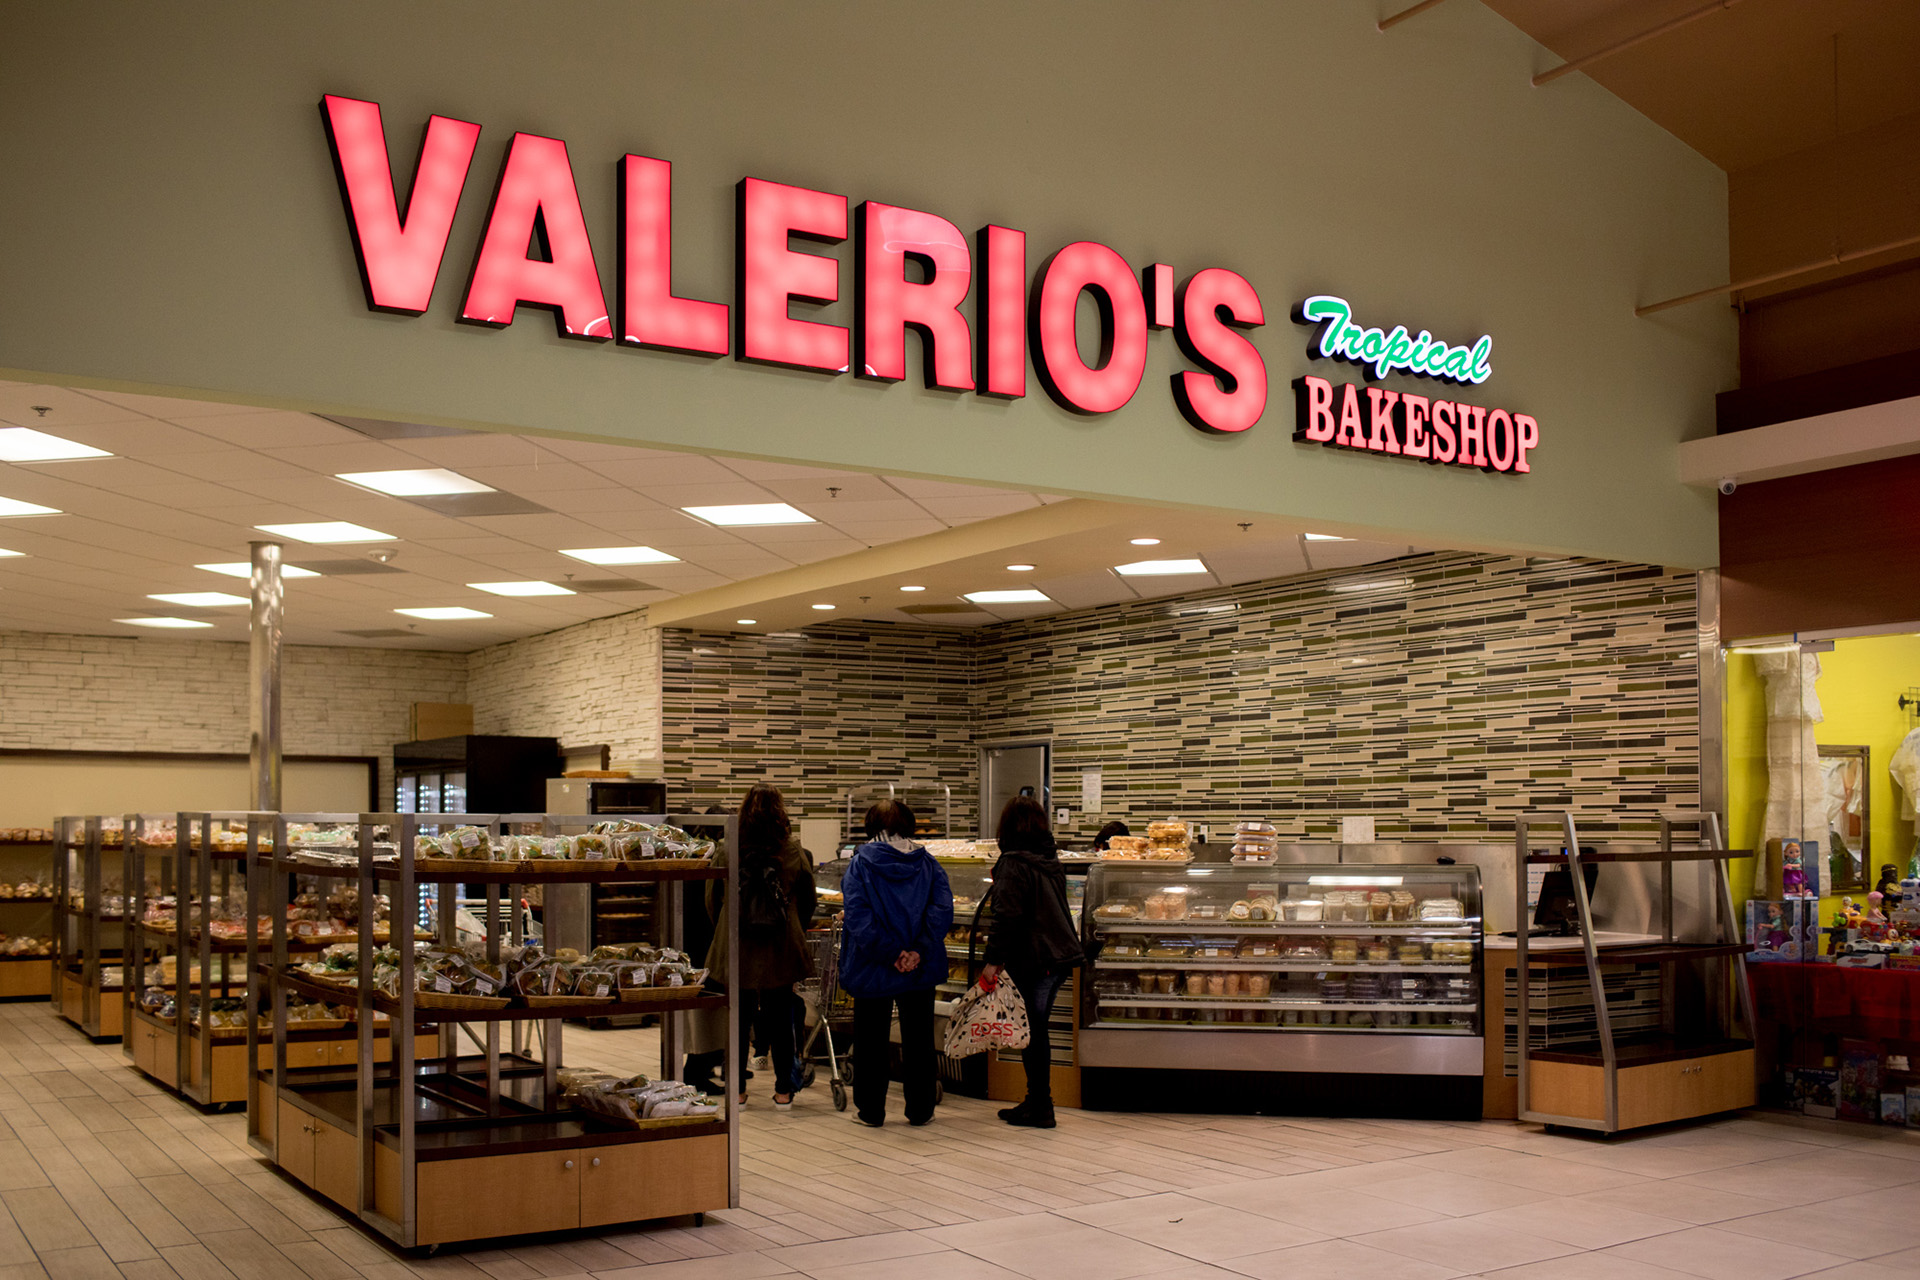 Valerio’s Tropical Bakeshop began in the Philippines in the 1950s, and opened their first Bay Area location in Vallejo in 1995, with the second location in Daly City opening in 1997. They currently have 15 locations in the United States. Along with their fresh pandesal, Chel recommends their pimiento spread.